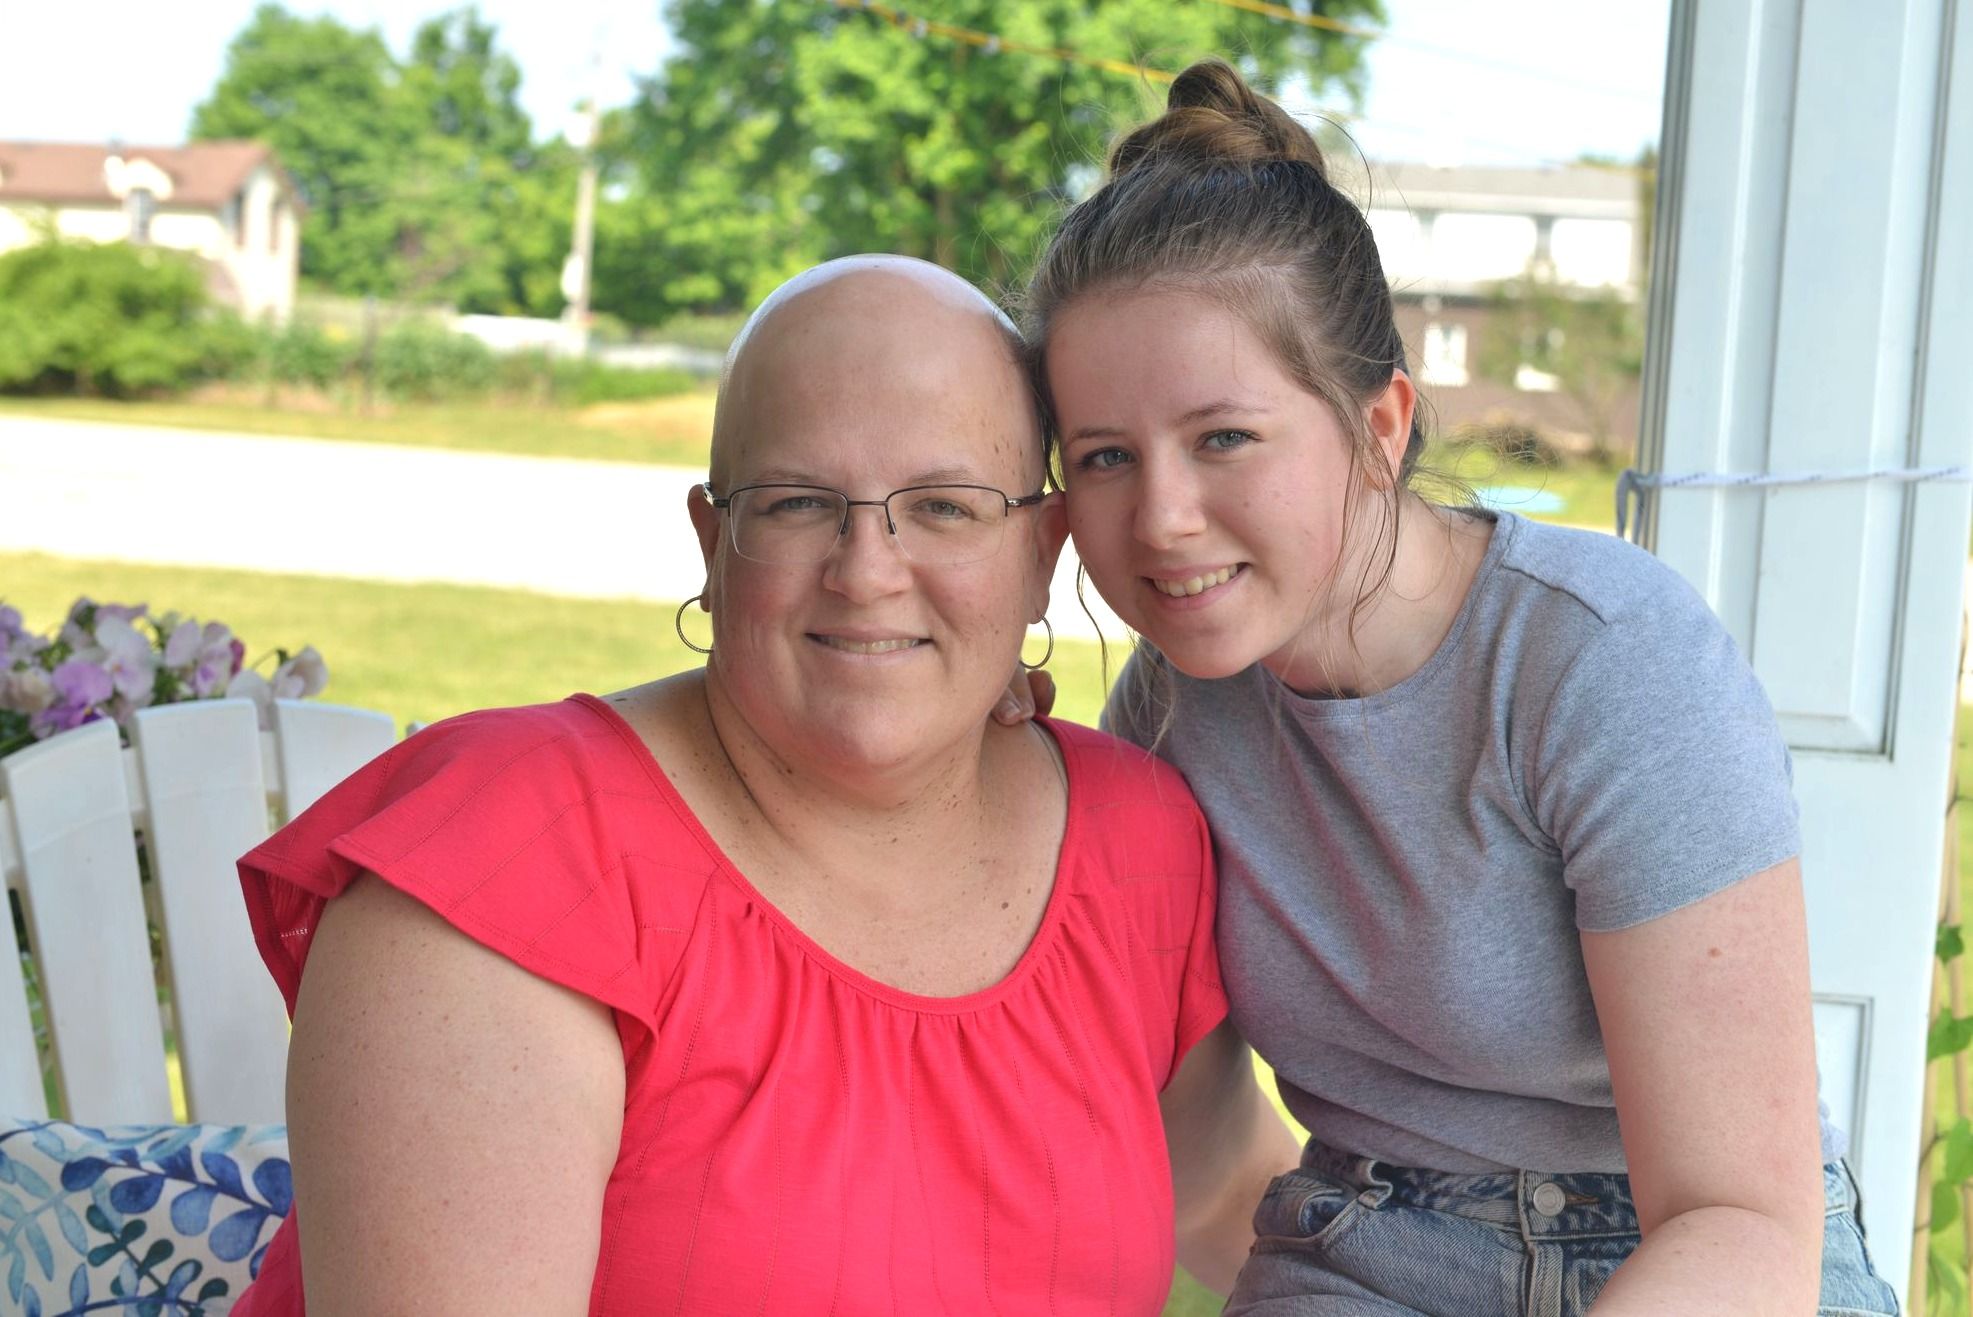 Diagnosed with cancer, Hawkesville woman is a proponent for getting tested